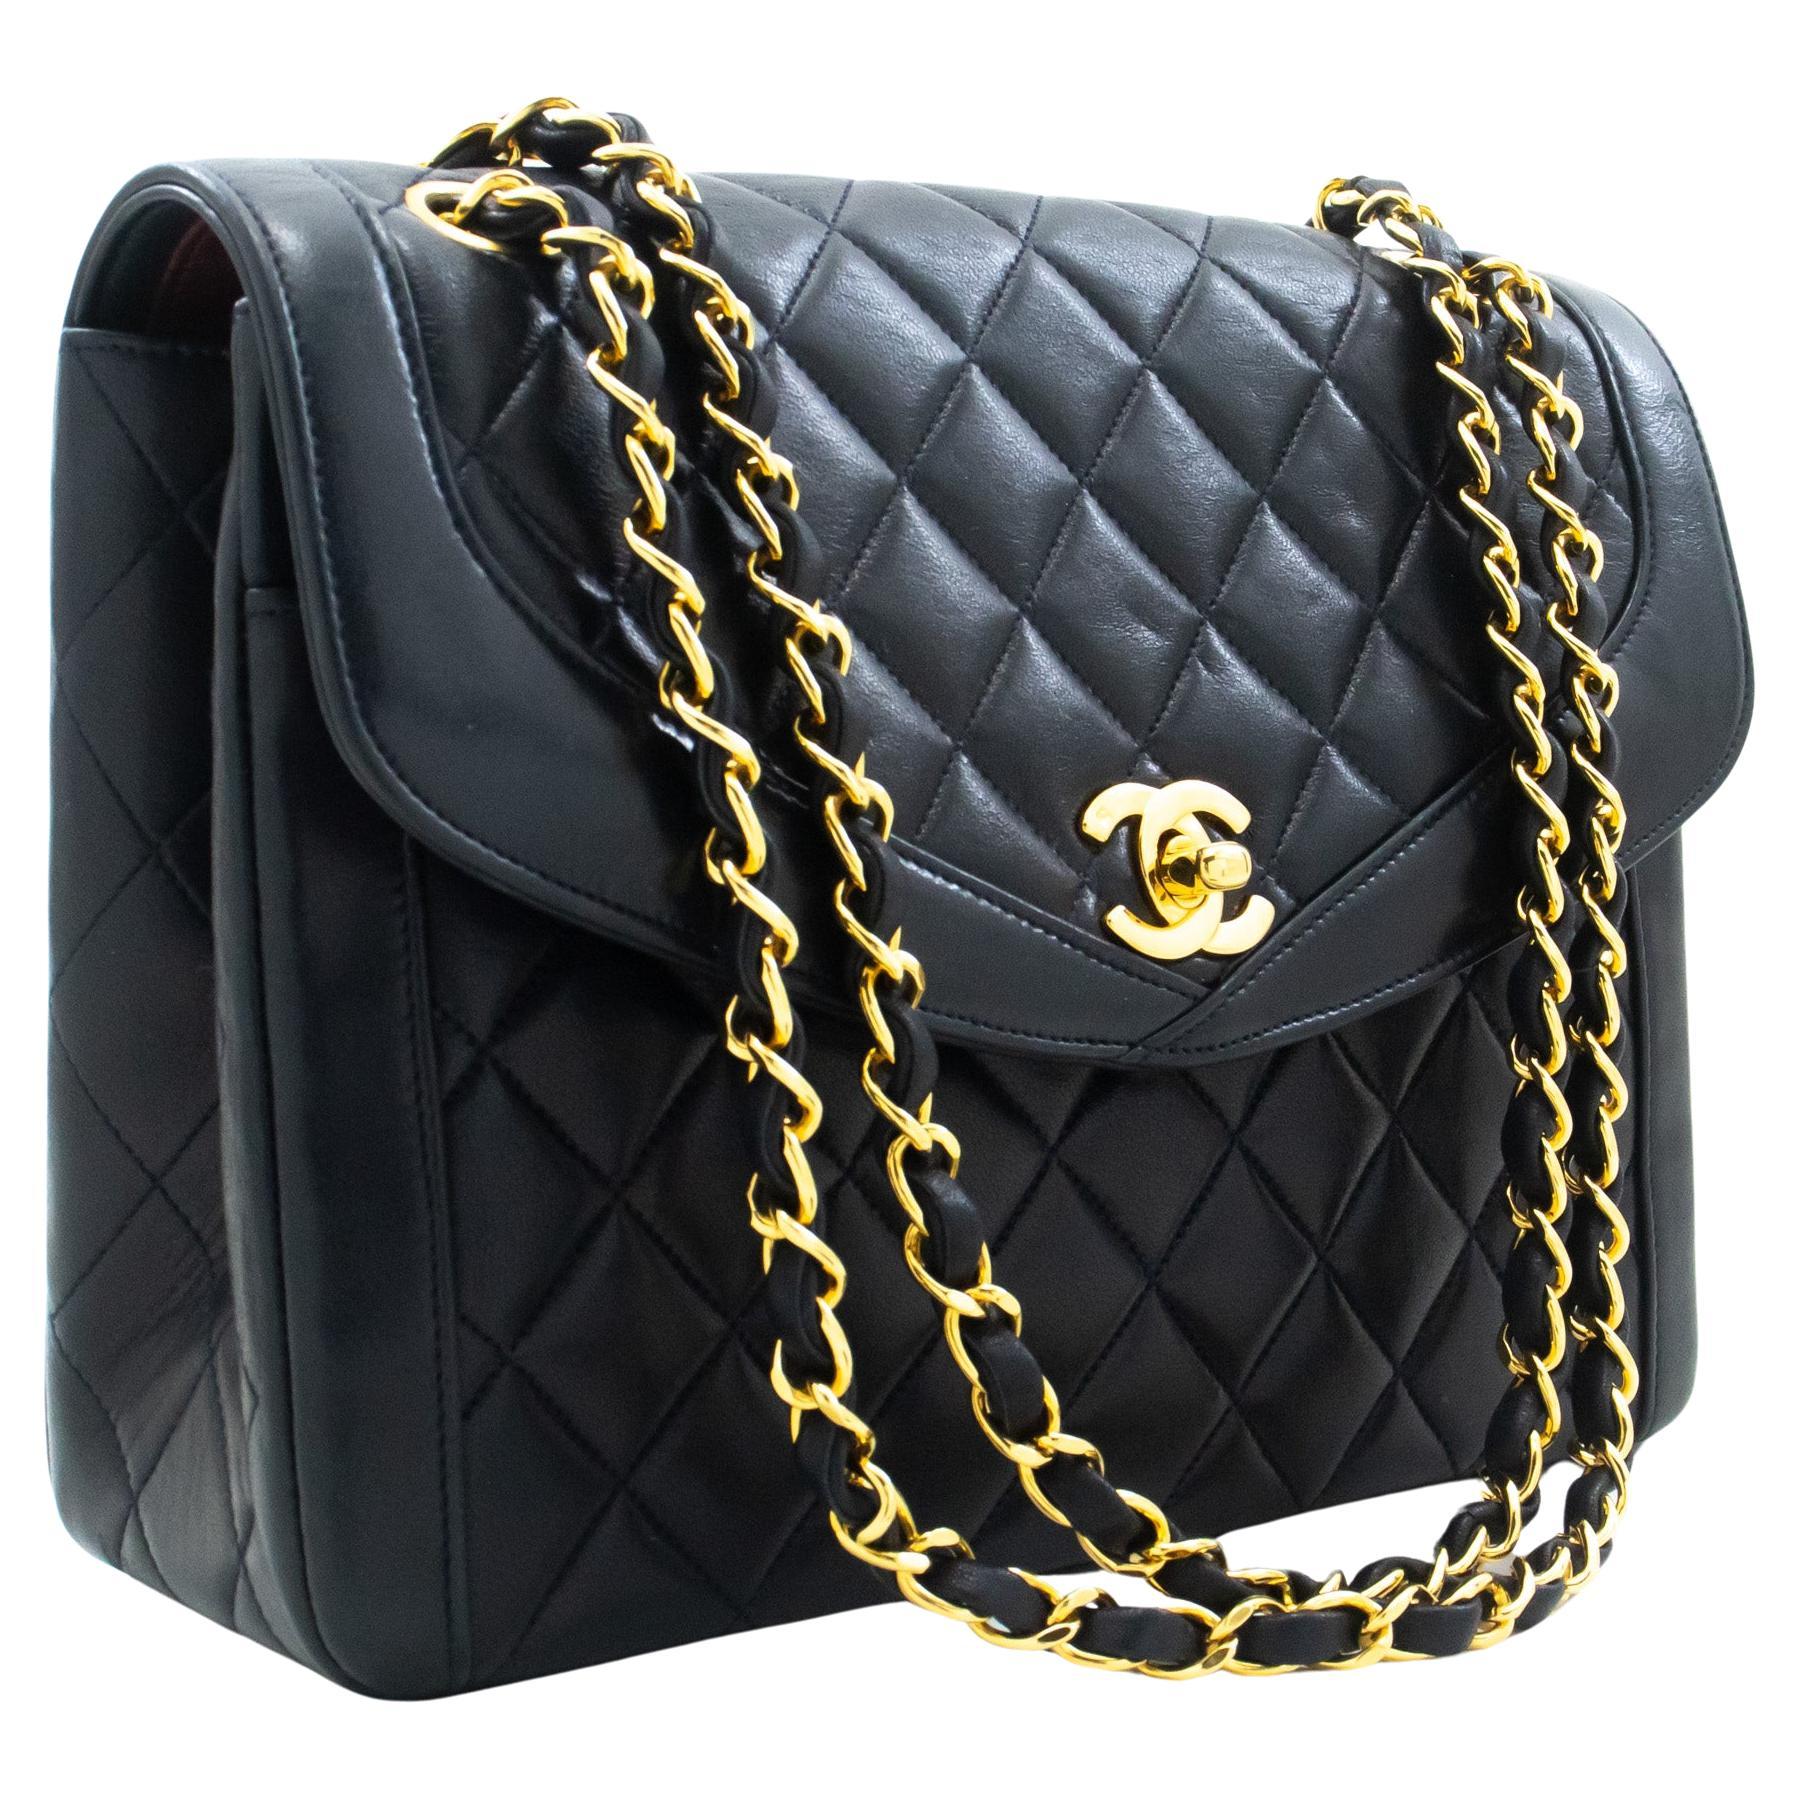 CHANEL NAVY Vintage Chain Shoulder Bag Lambskin Flap Quilted Purse For Sale